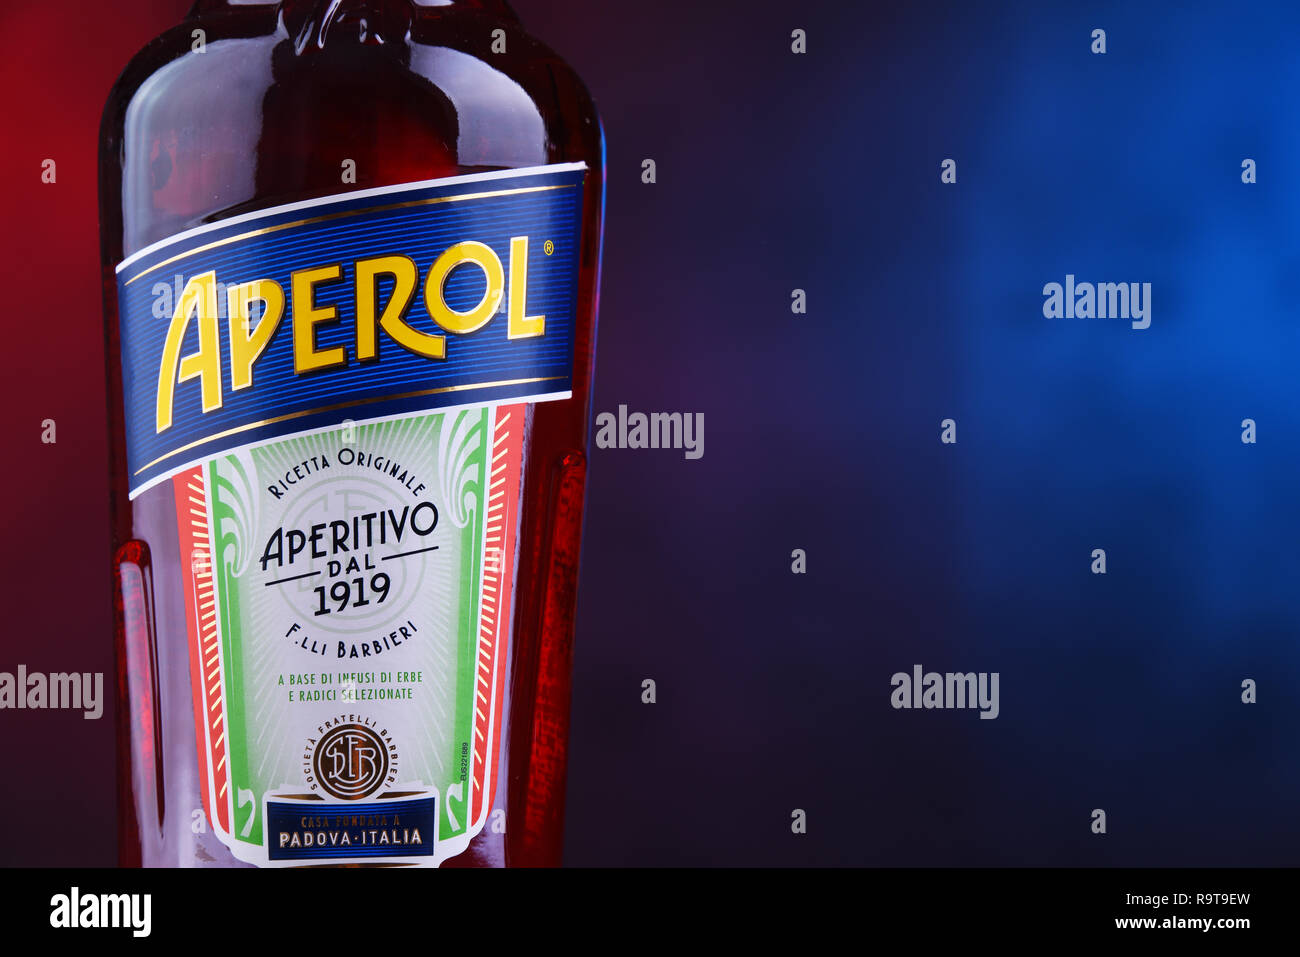 POZNAN, POL - NOV 29, 2018: Bottle of Aperol, an Italian aperitif made of gentian, rhubarb, and cinchona, It is produced by the Campari company. Stock Photo